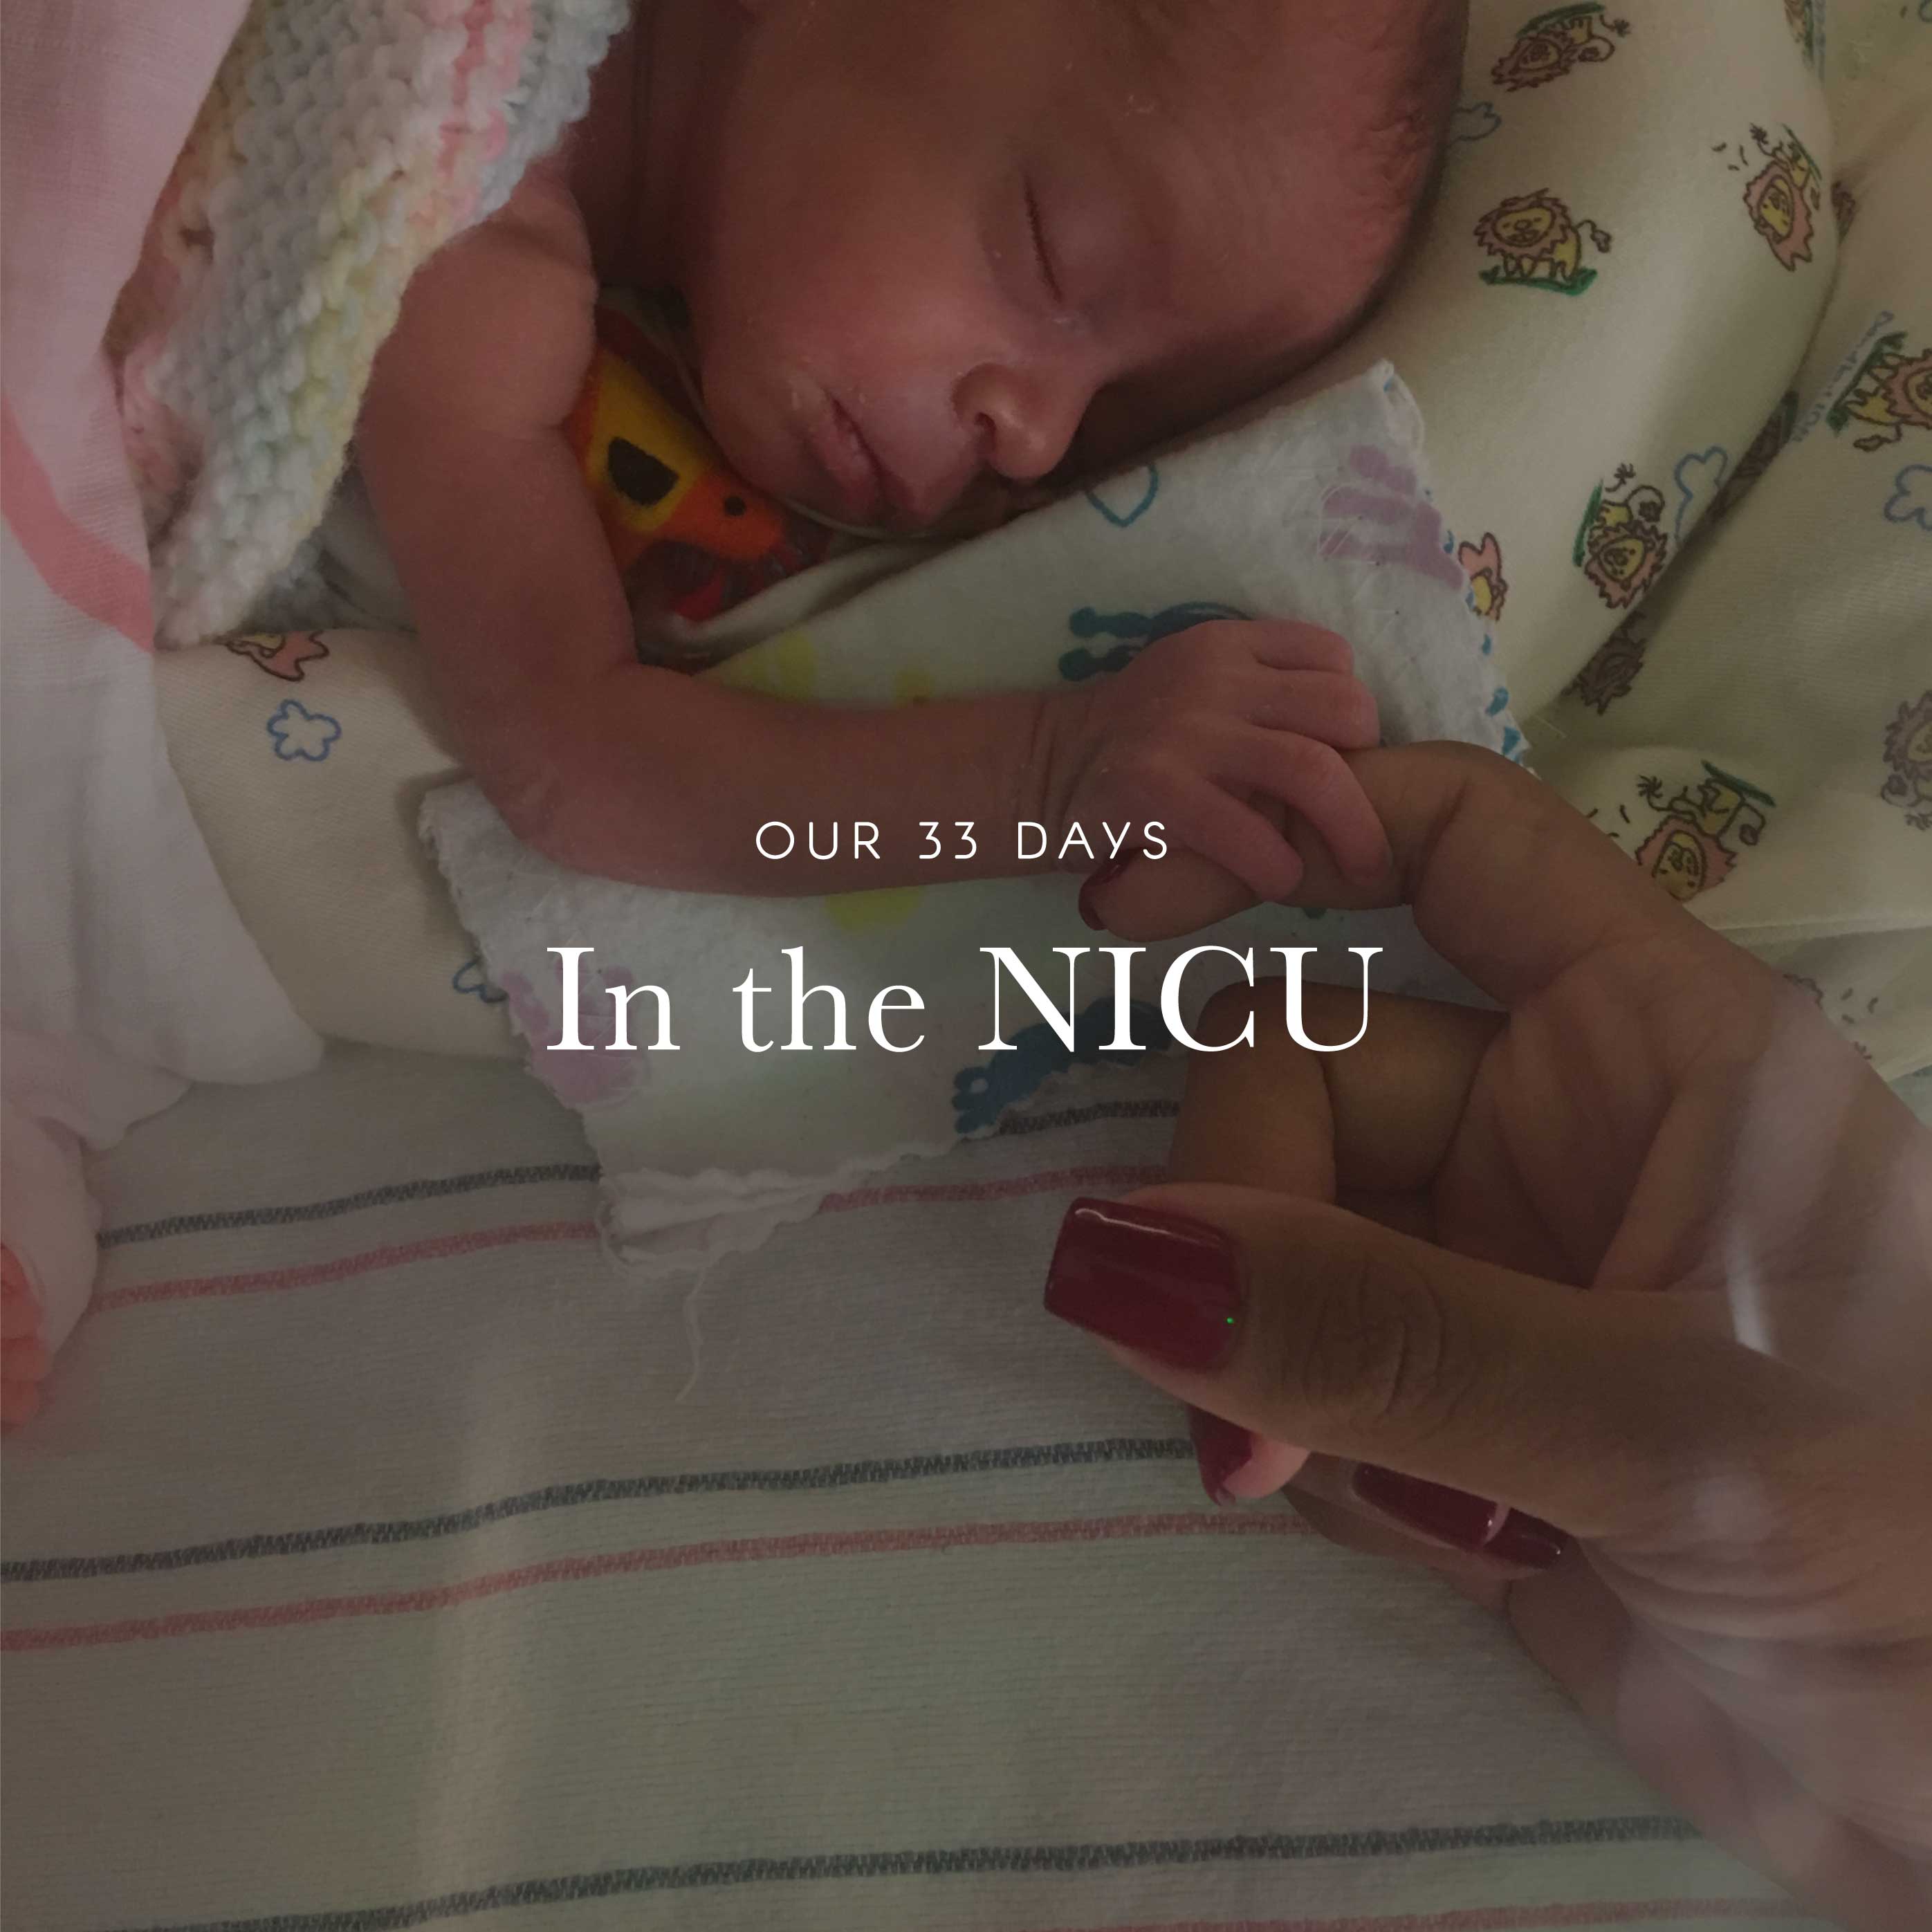 Our 33 Days in the NICU